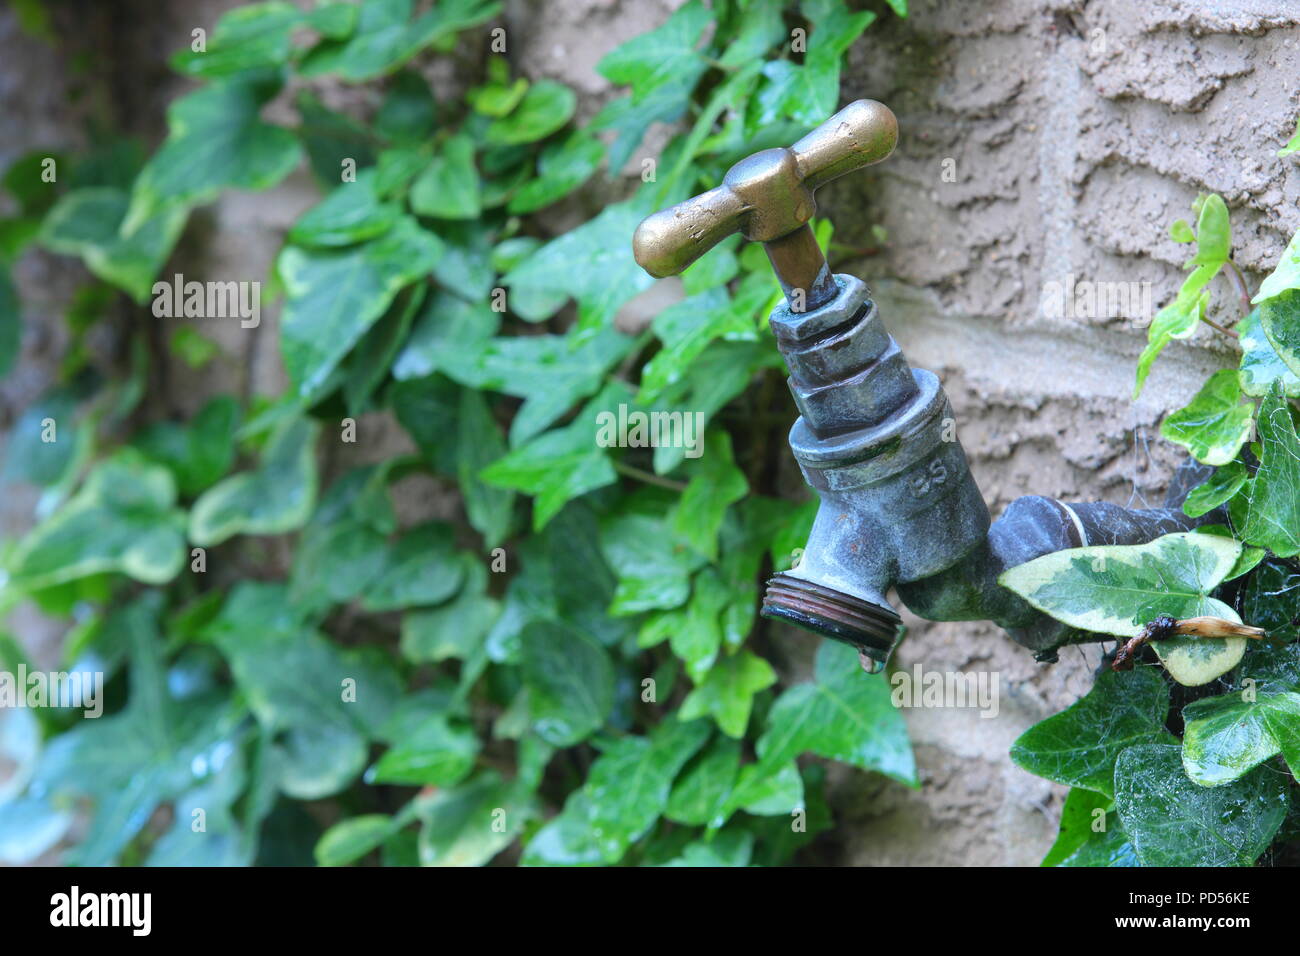 A tap which looks dry due to the heatwave and heading towards a hosepipe ban Stock Photo